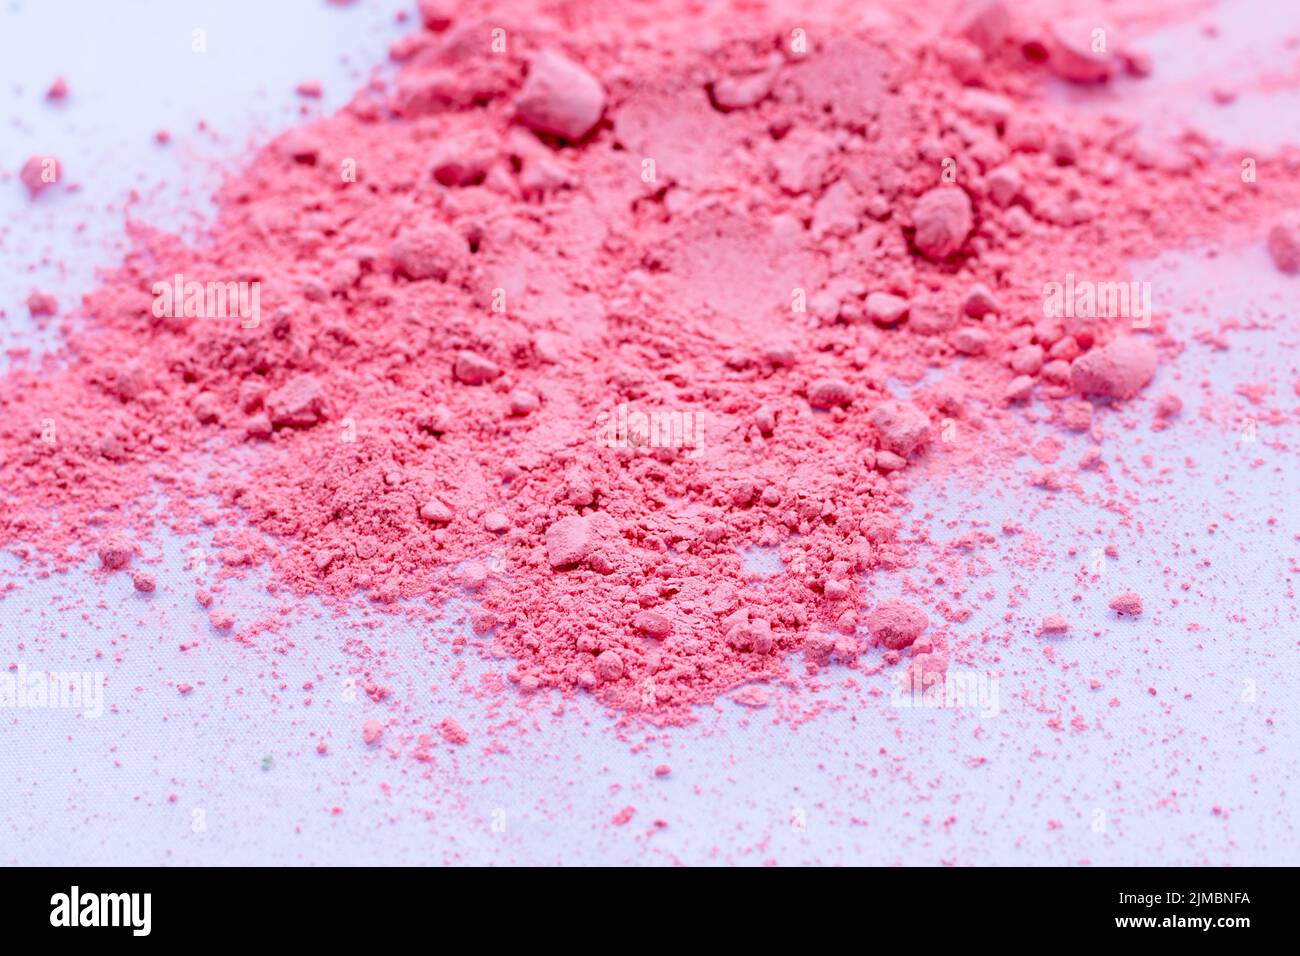 Pink color background of chalk powder. Pink color dust particles splattered on white background. Stock Photo